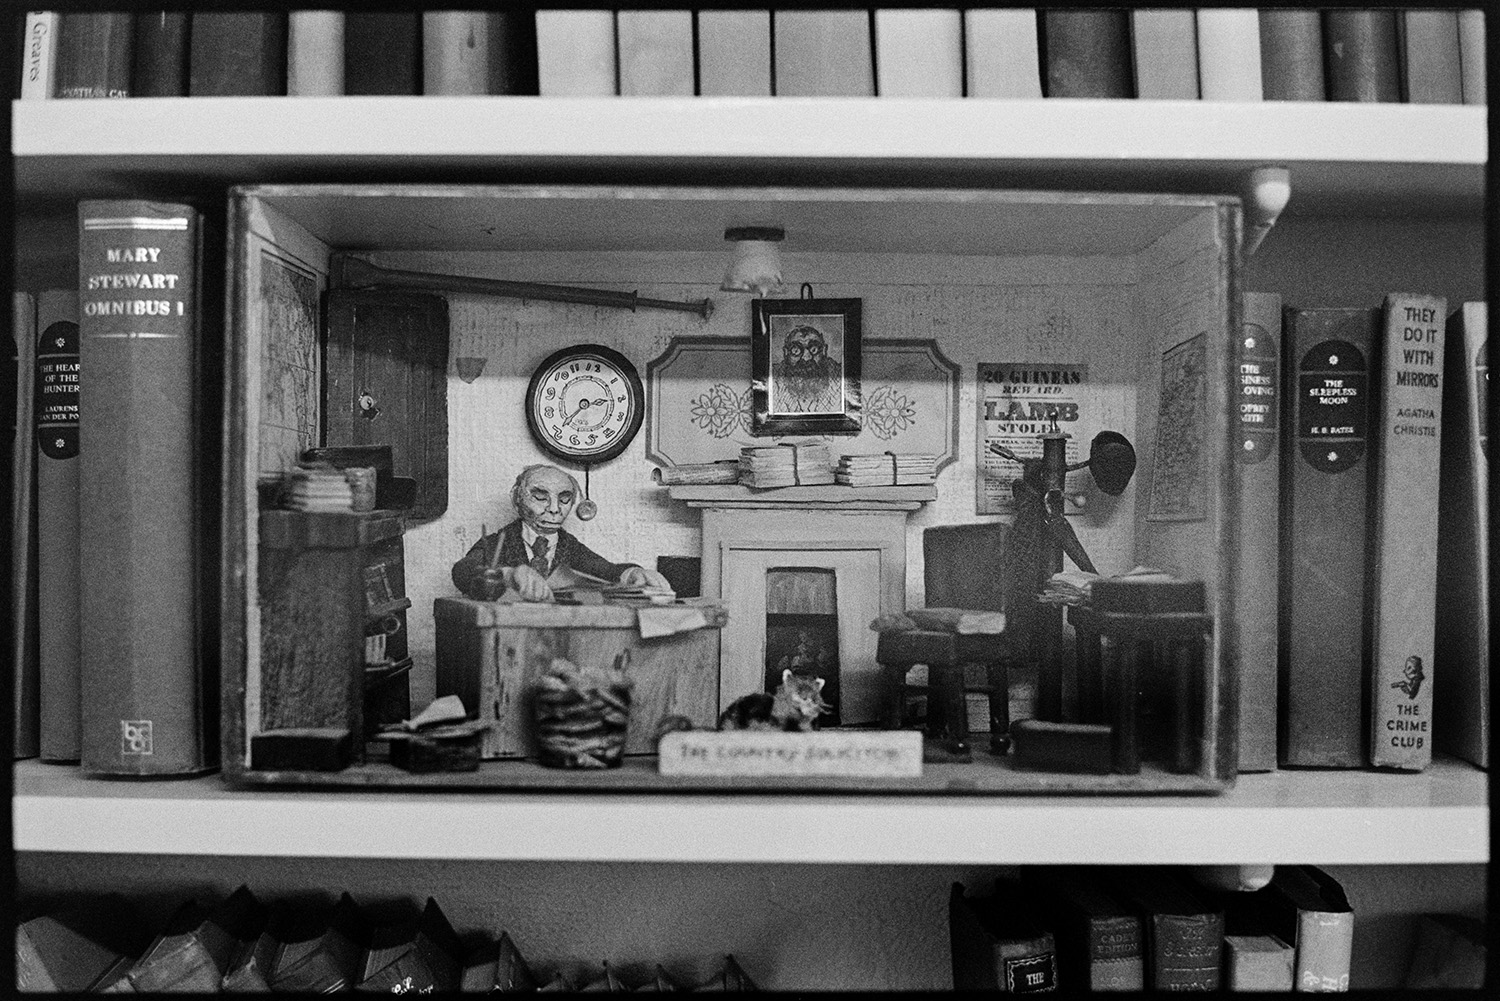 Model of solicitors office made by Cecile Joynson. 
[A model of a solicitors office made by Cecile Joynson. It is on a bookshelf in a house in Brightly, Dolton.]